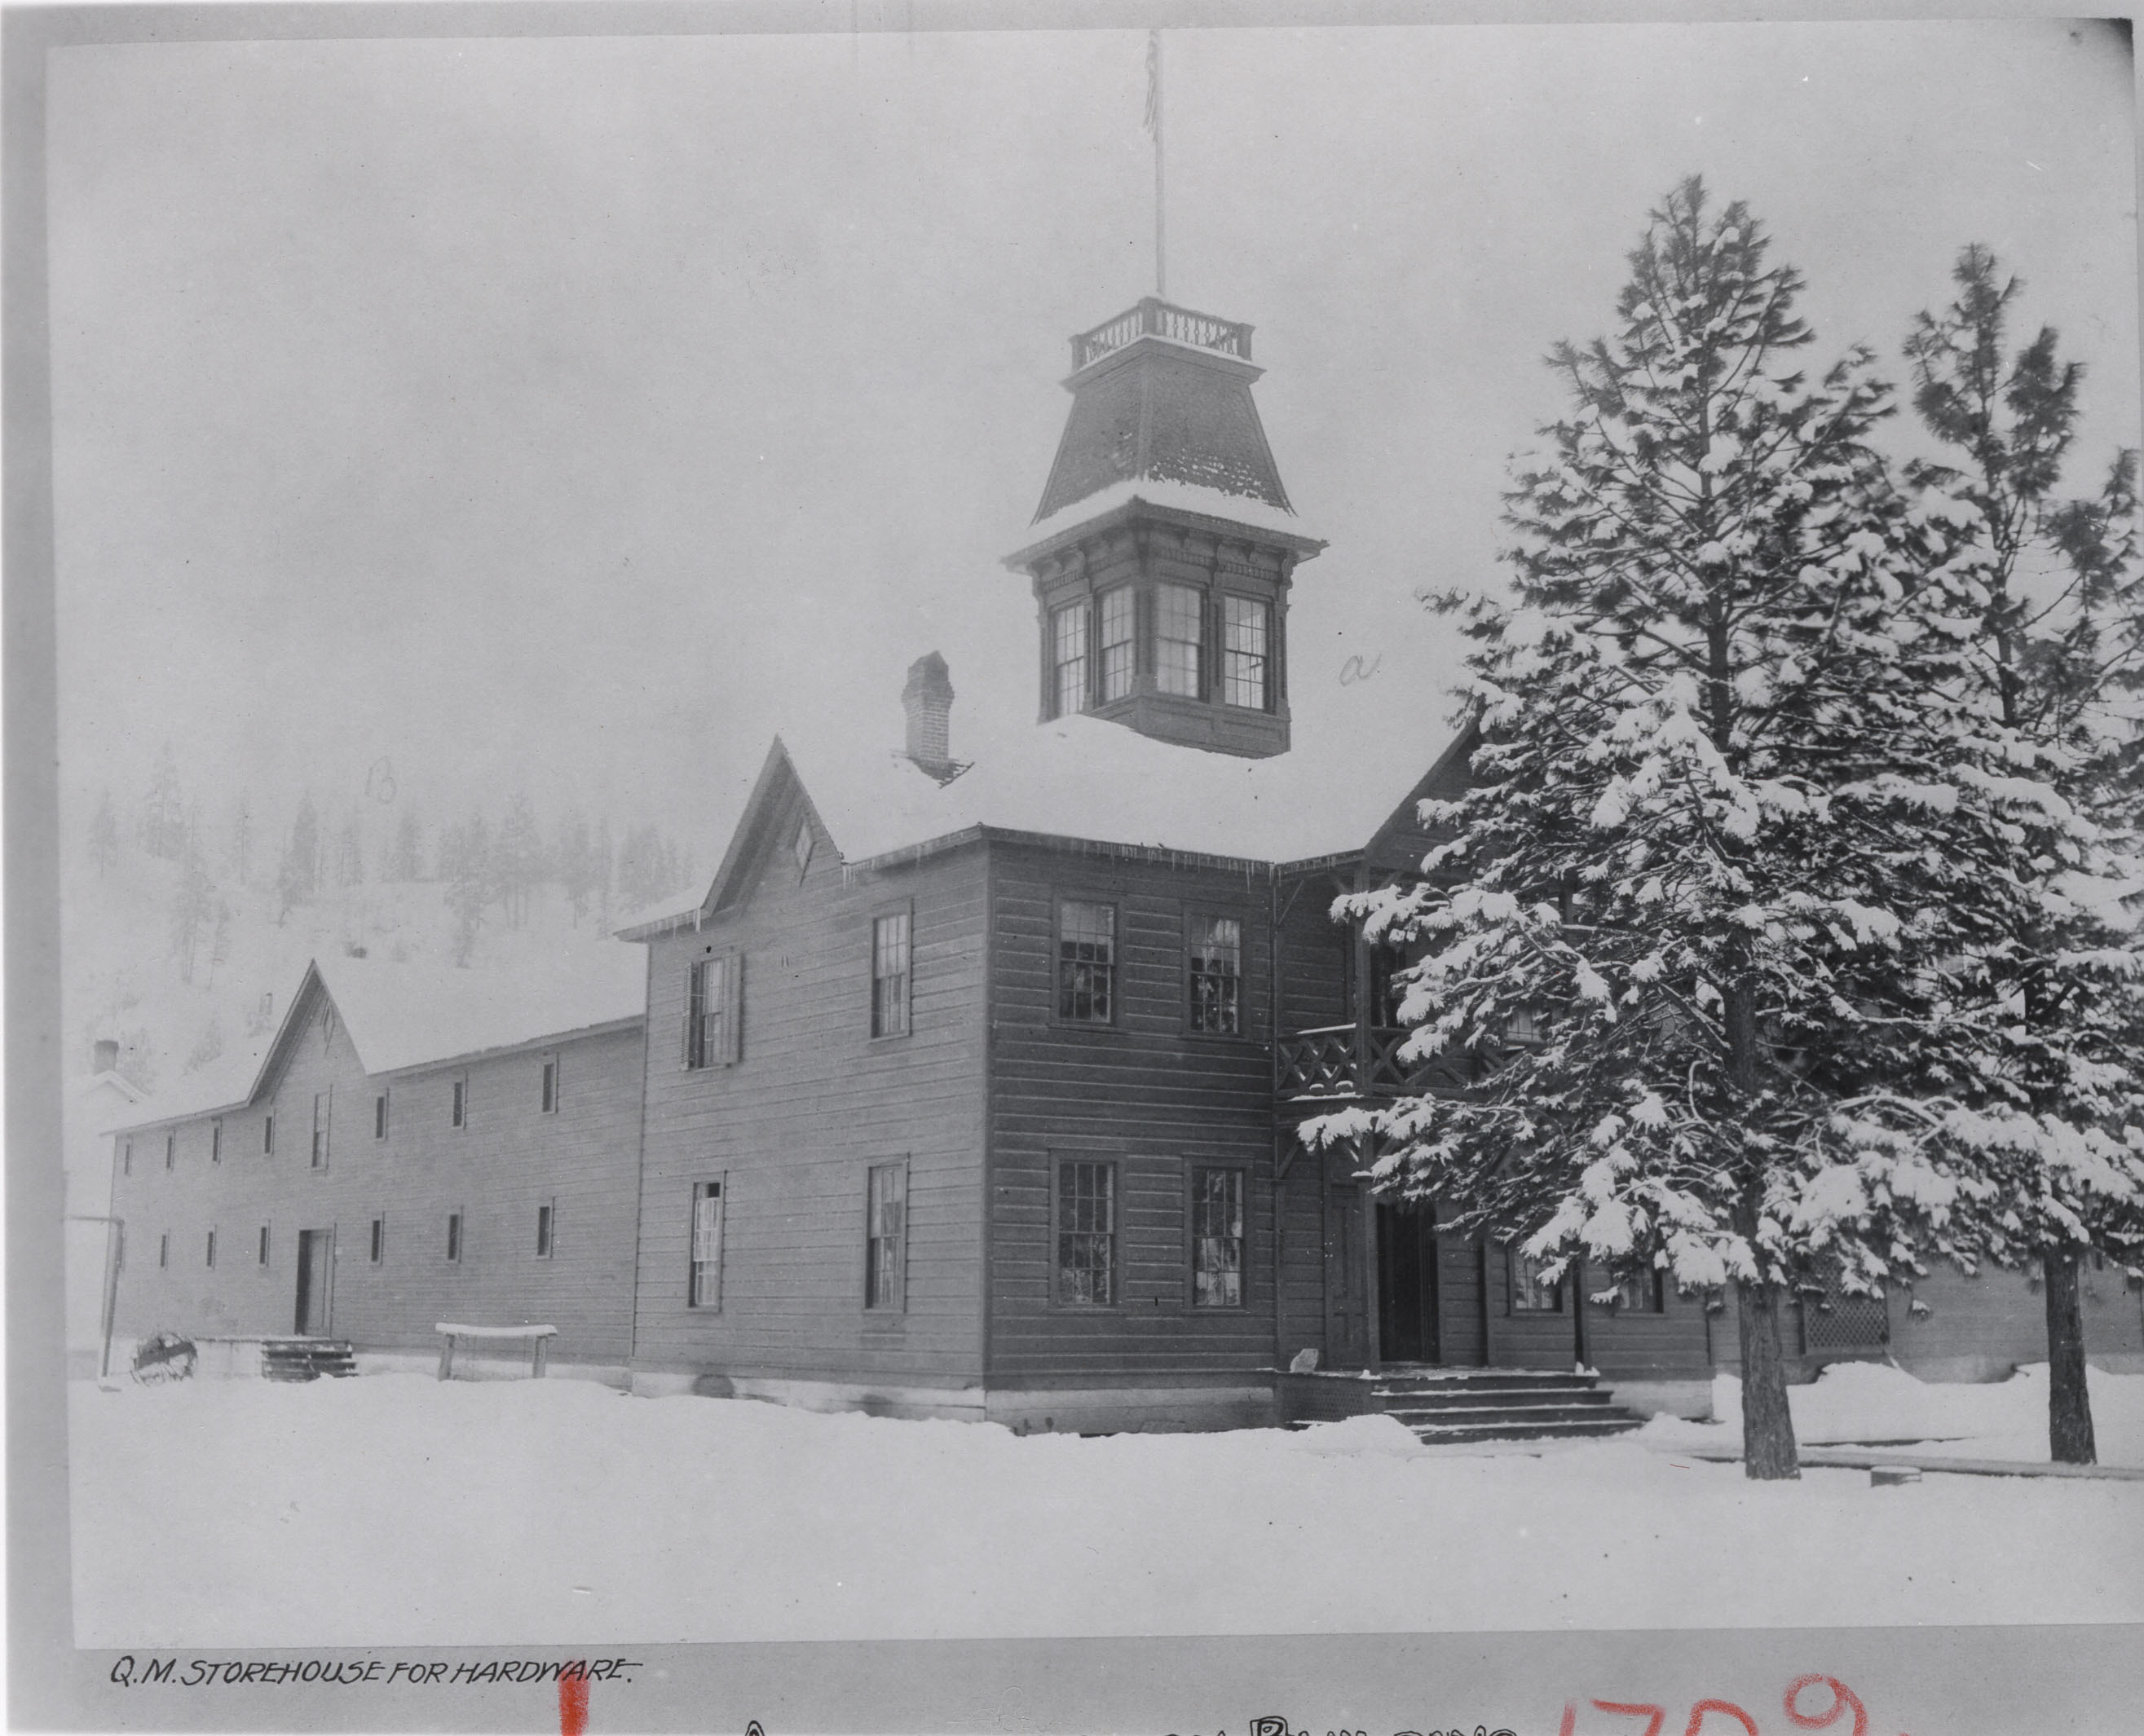 Black and white photograph of a multi-story wooden building with tower in the snow